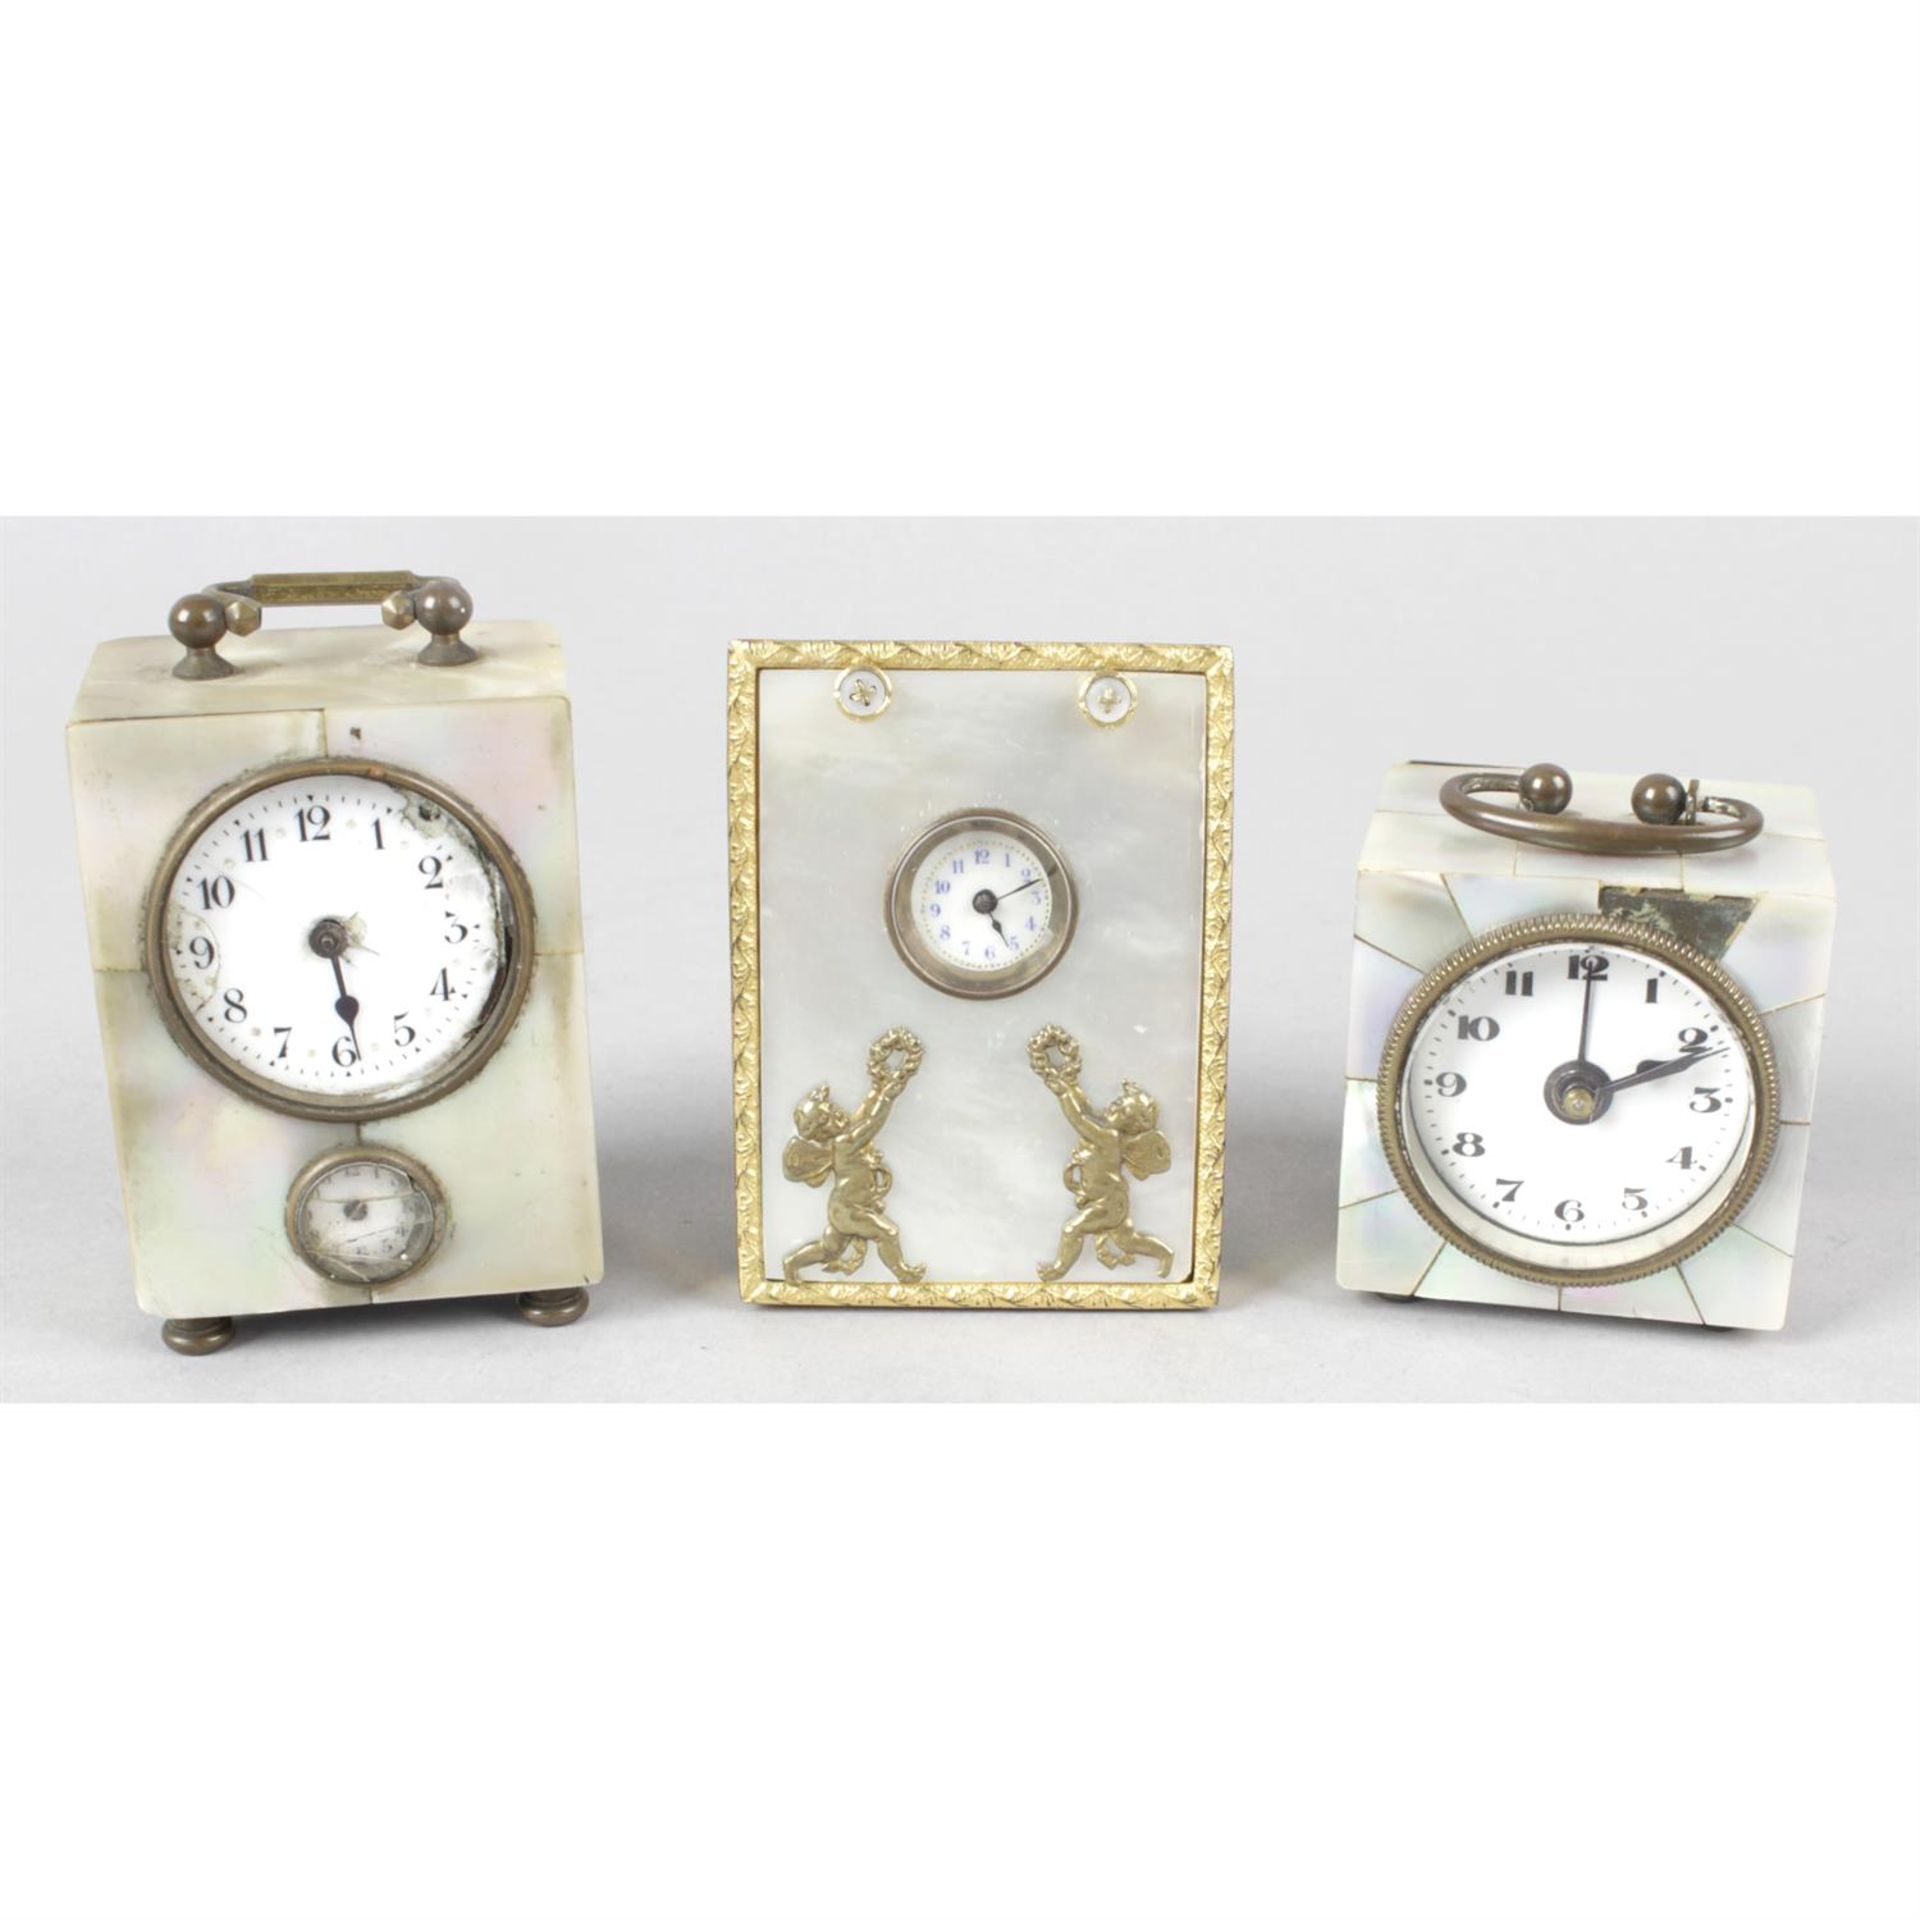 A selection of travel and carriage clocks. - Image 3 of 3